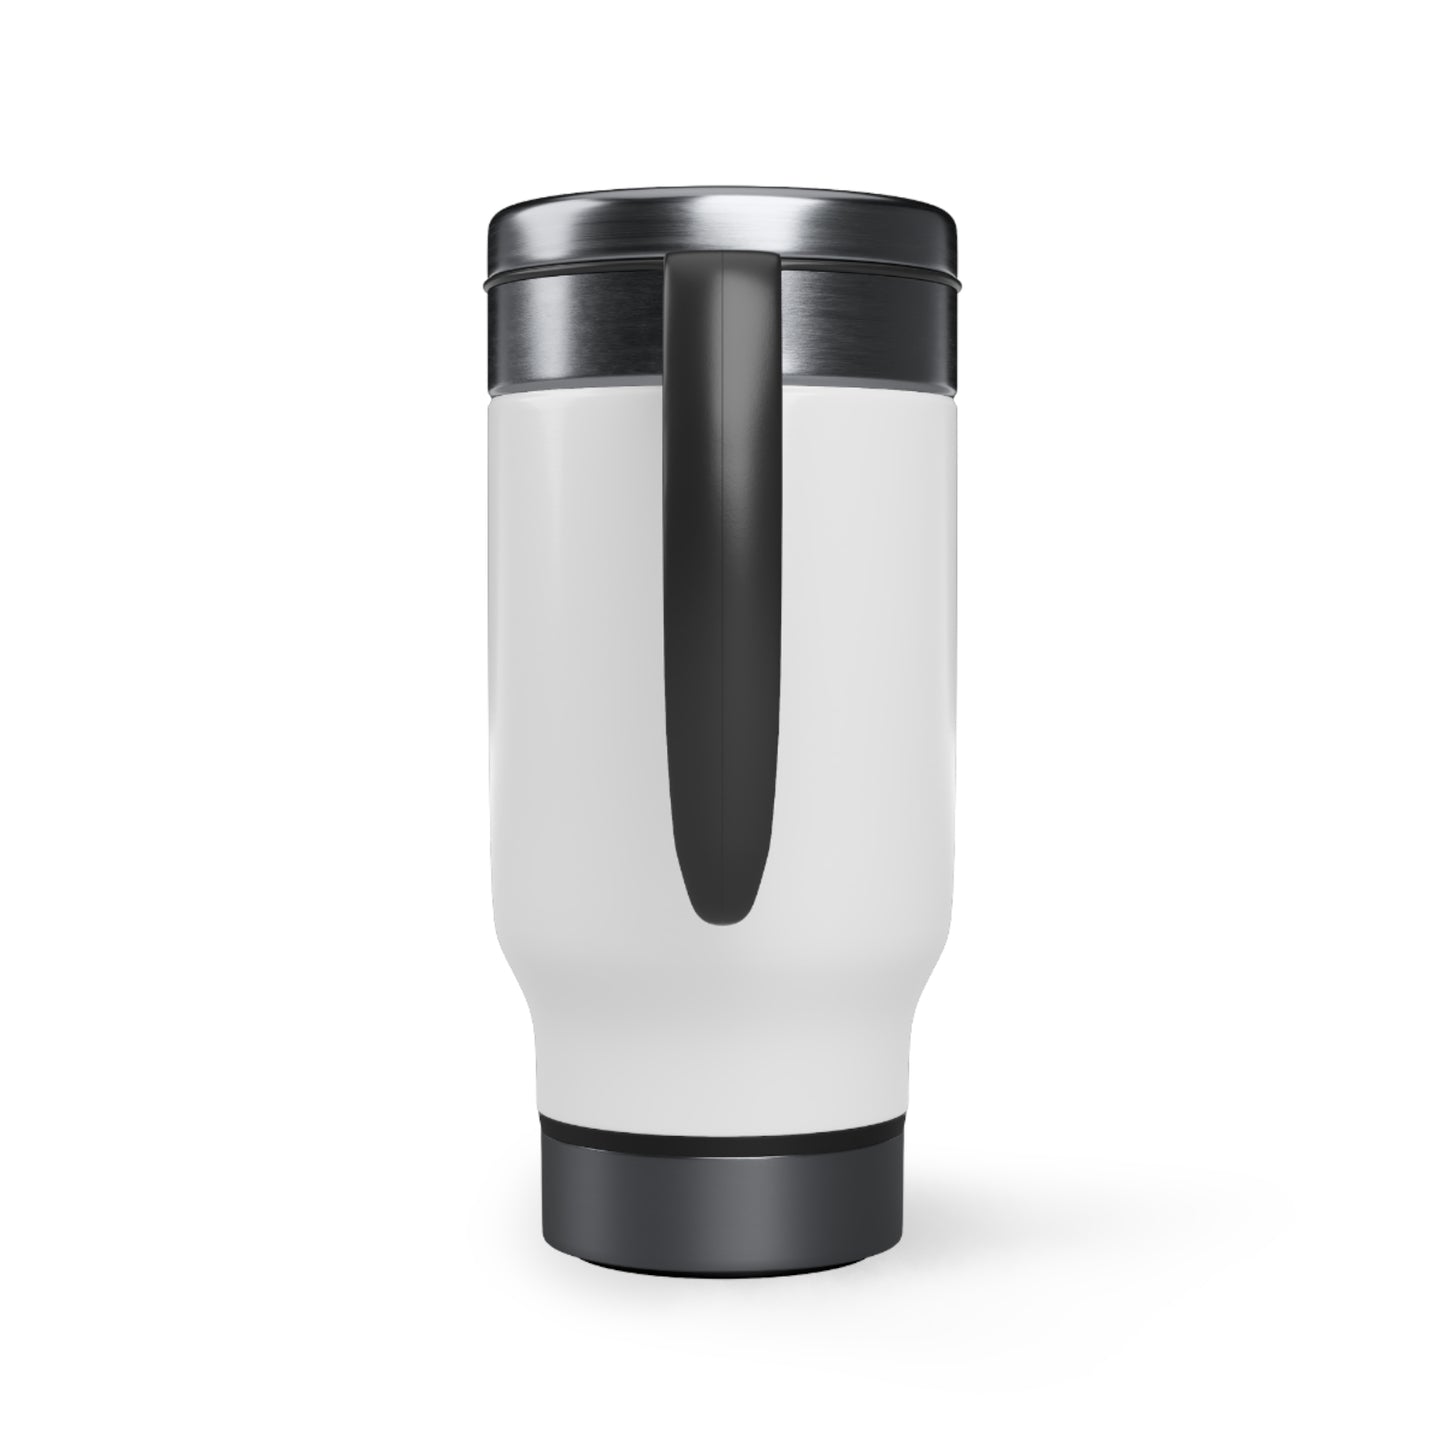 The Invincibles Team One Stainless Steel Travel Mug with Handle, 14oz